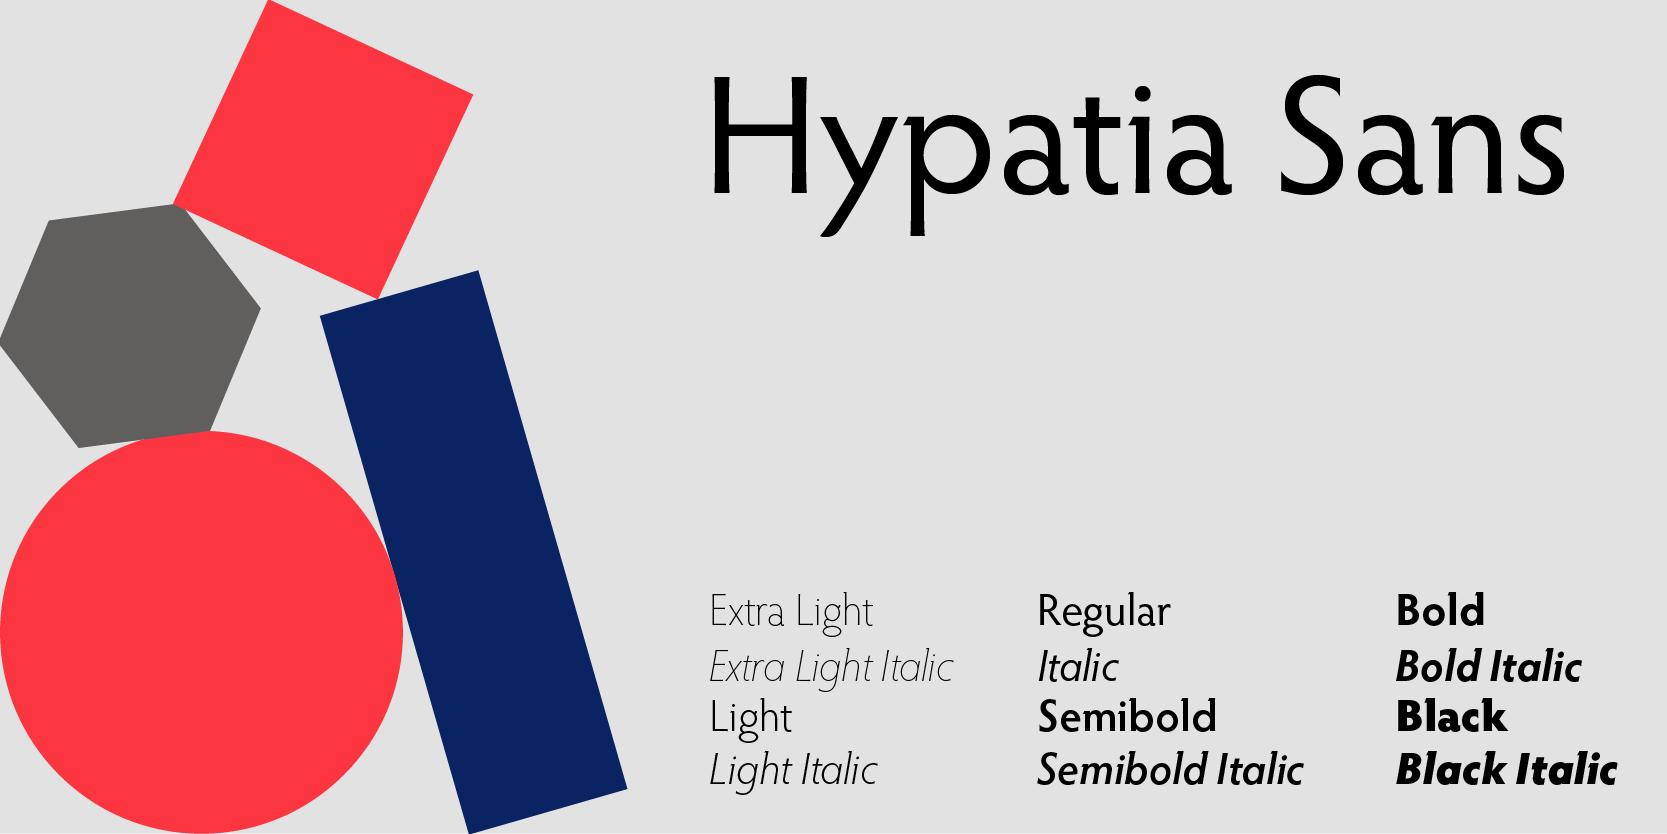 Card displaying Hypatia Sans typeface in various styles